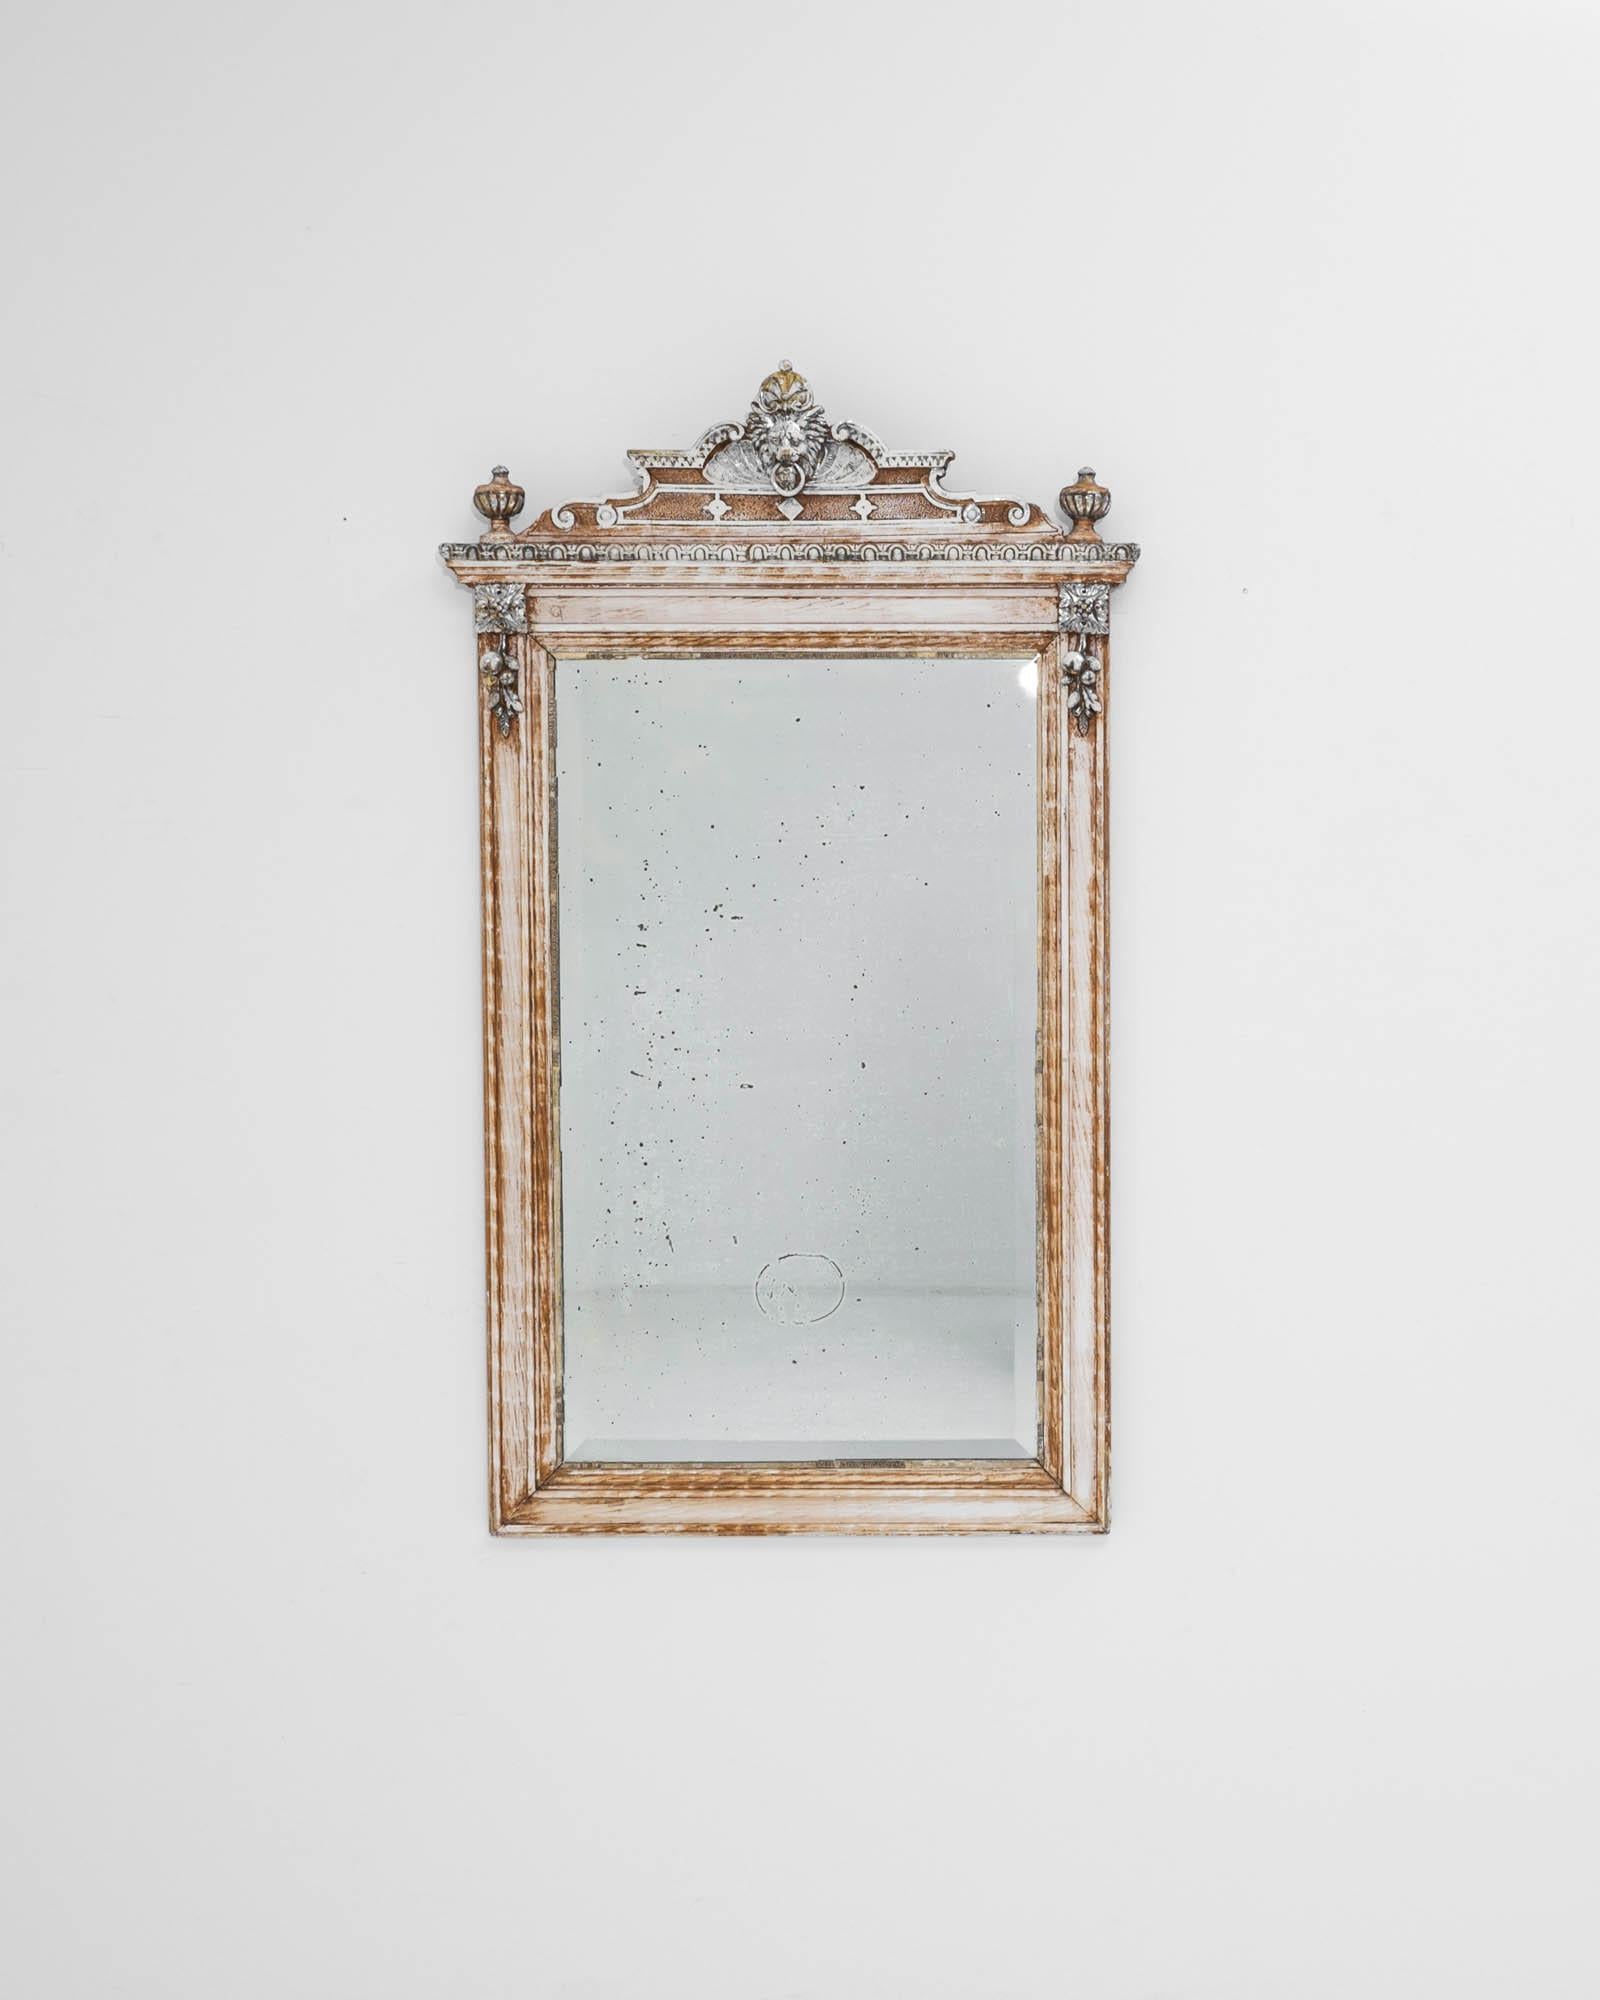 A wooden mirror created in 19th century France. This antique mirror radiates regality and a curious old-world sense of design and craftsmanship that leads one’s eye around its frame. Floral motifs, dazzling sculpted patterns, and a curious beast